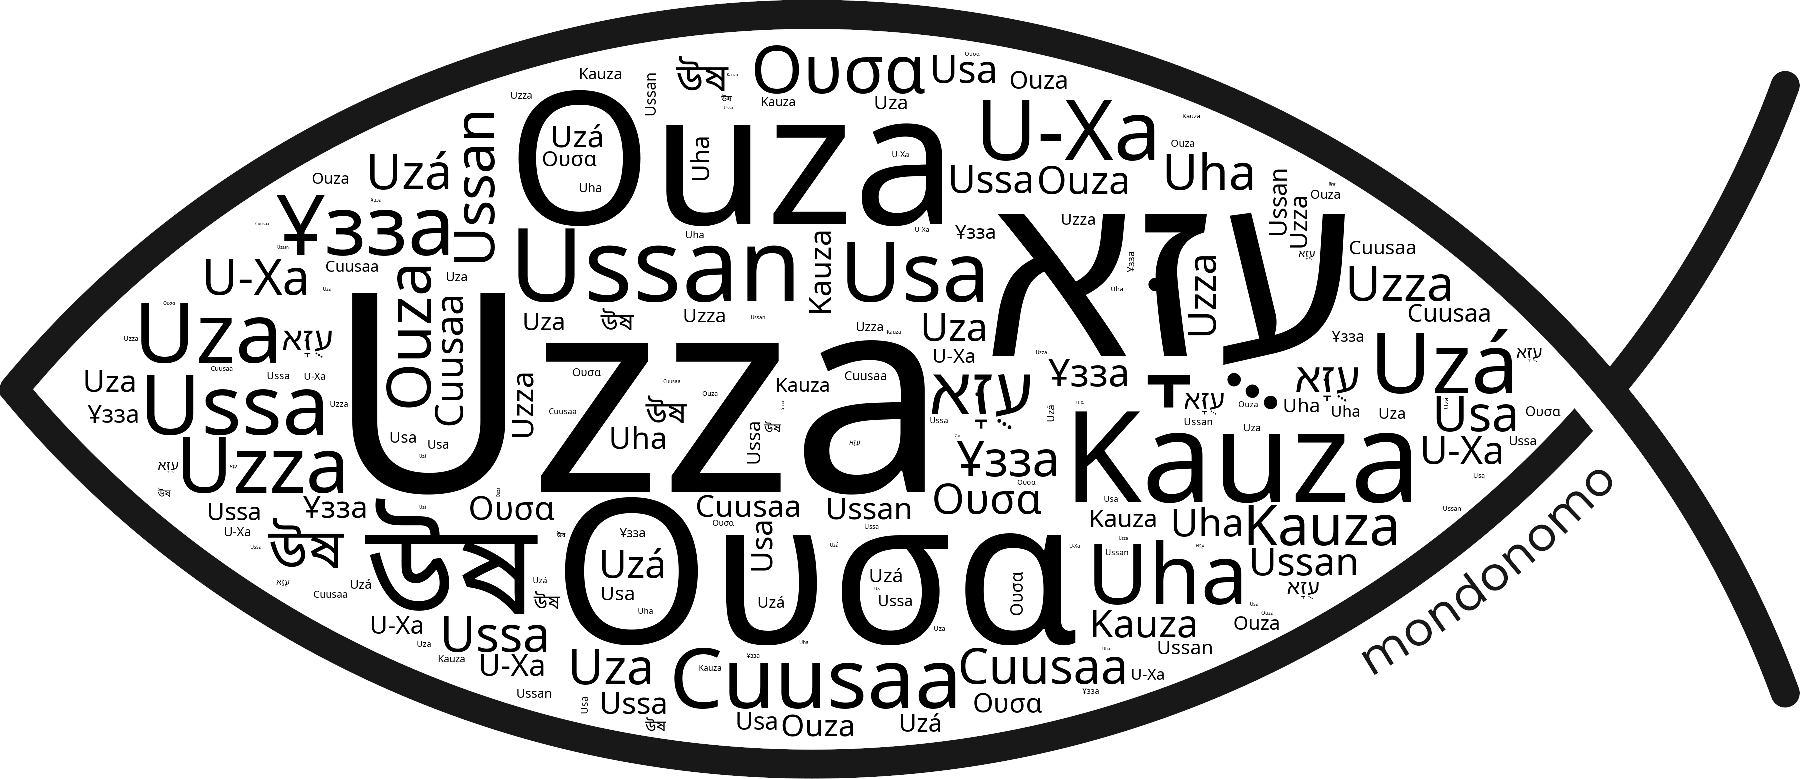 Name Uzza in the world's Bibles